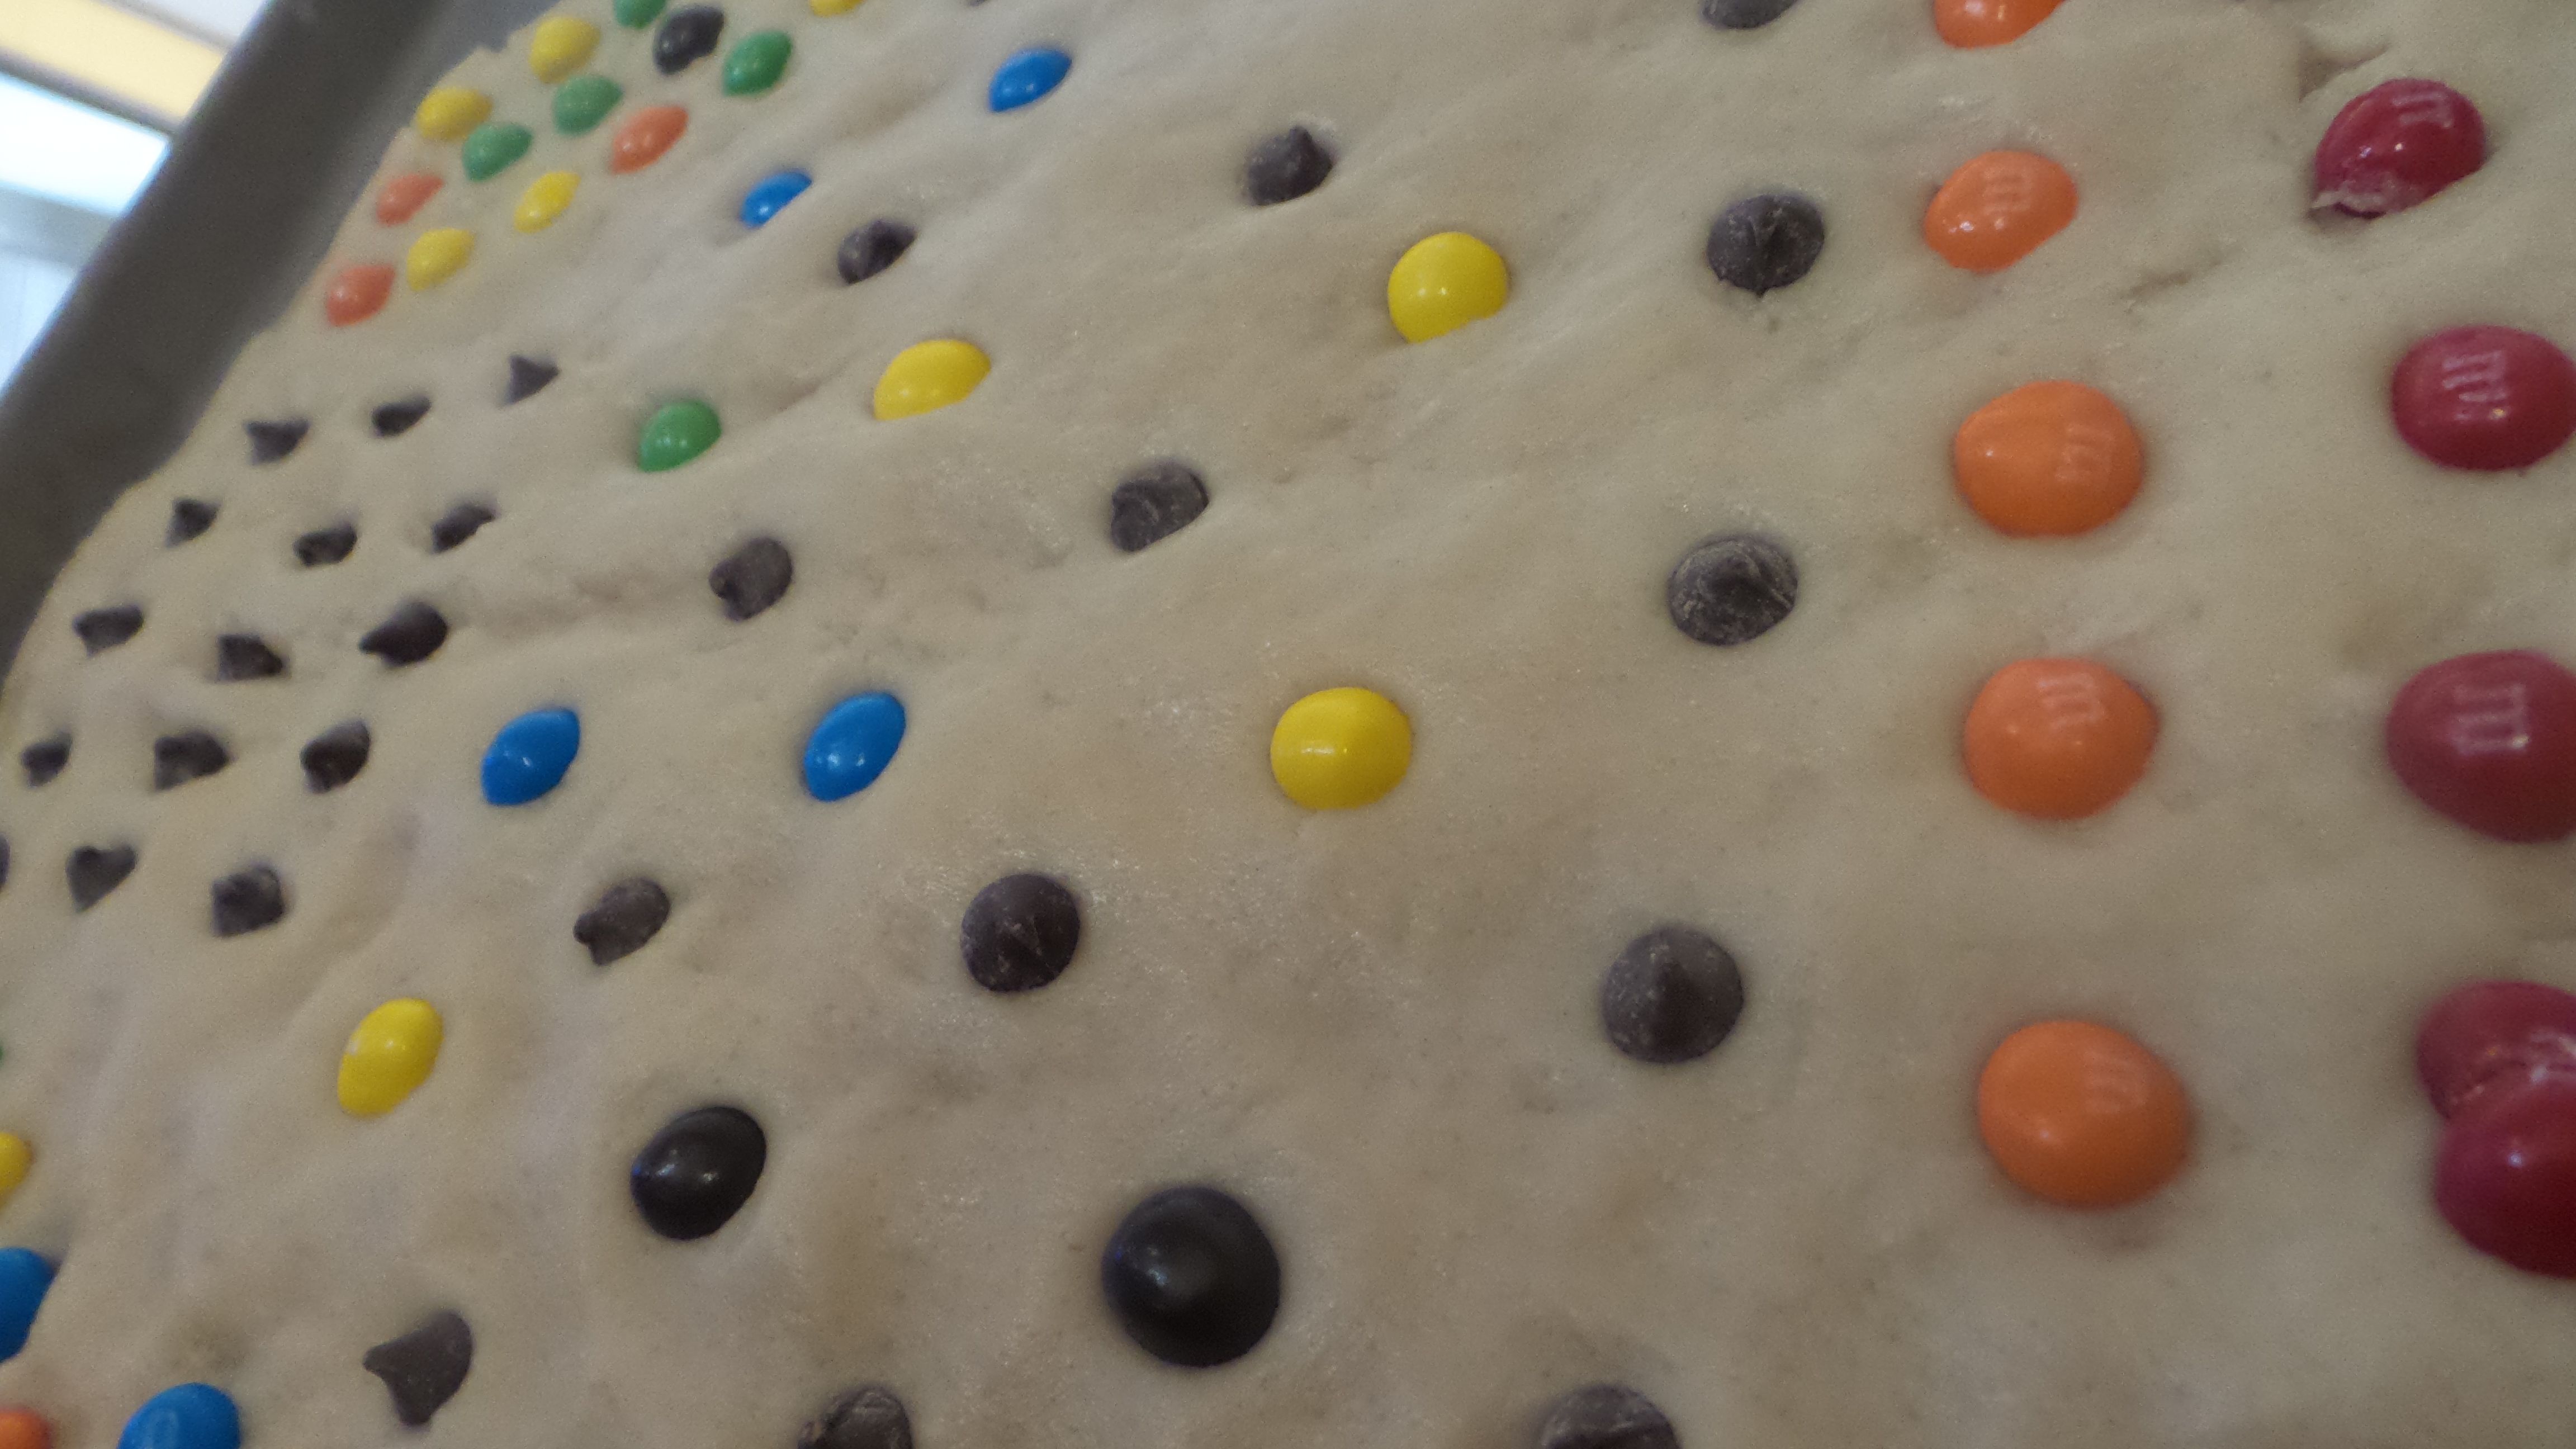 Classic Sugar Cookie Bars with the modern taste of M&M's® Crispy